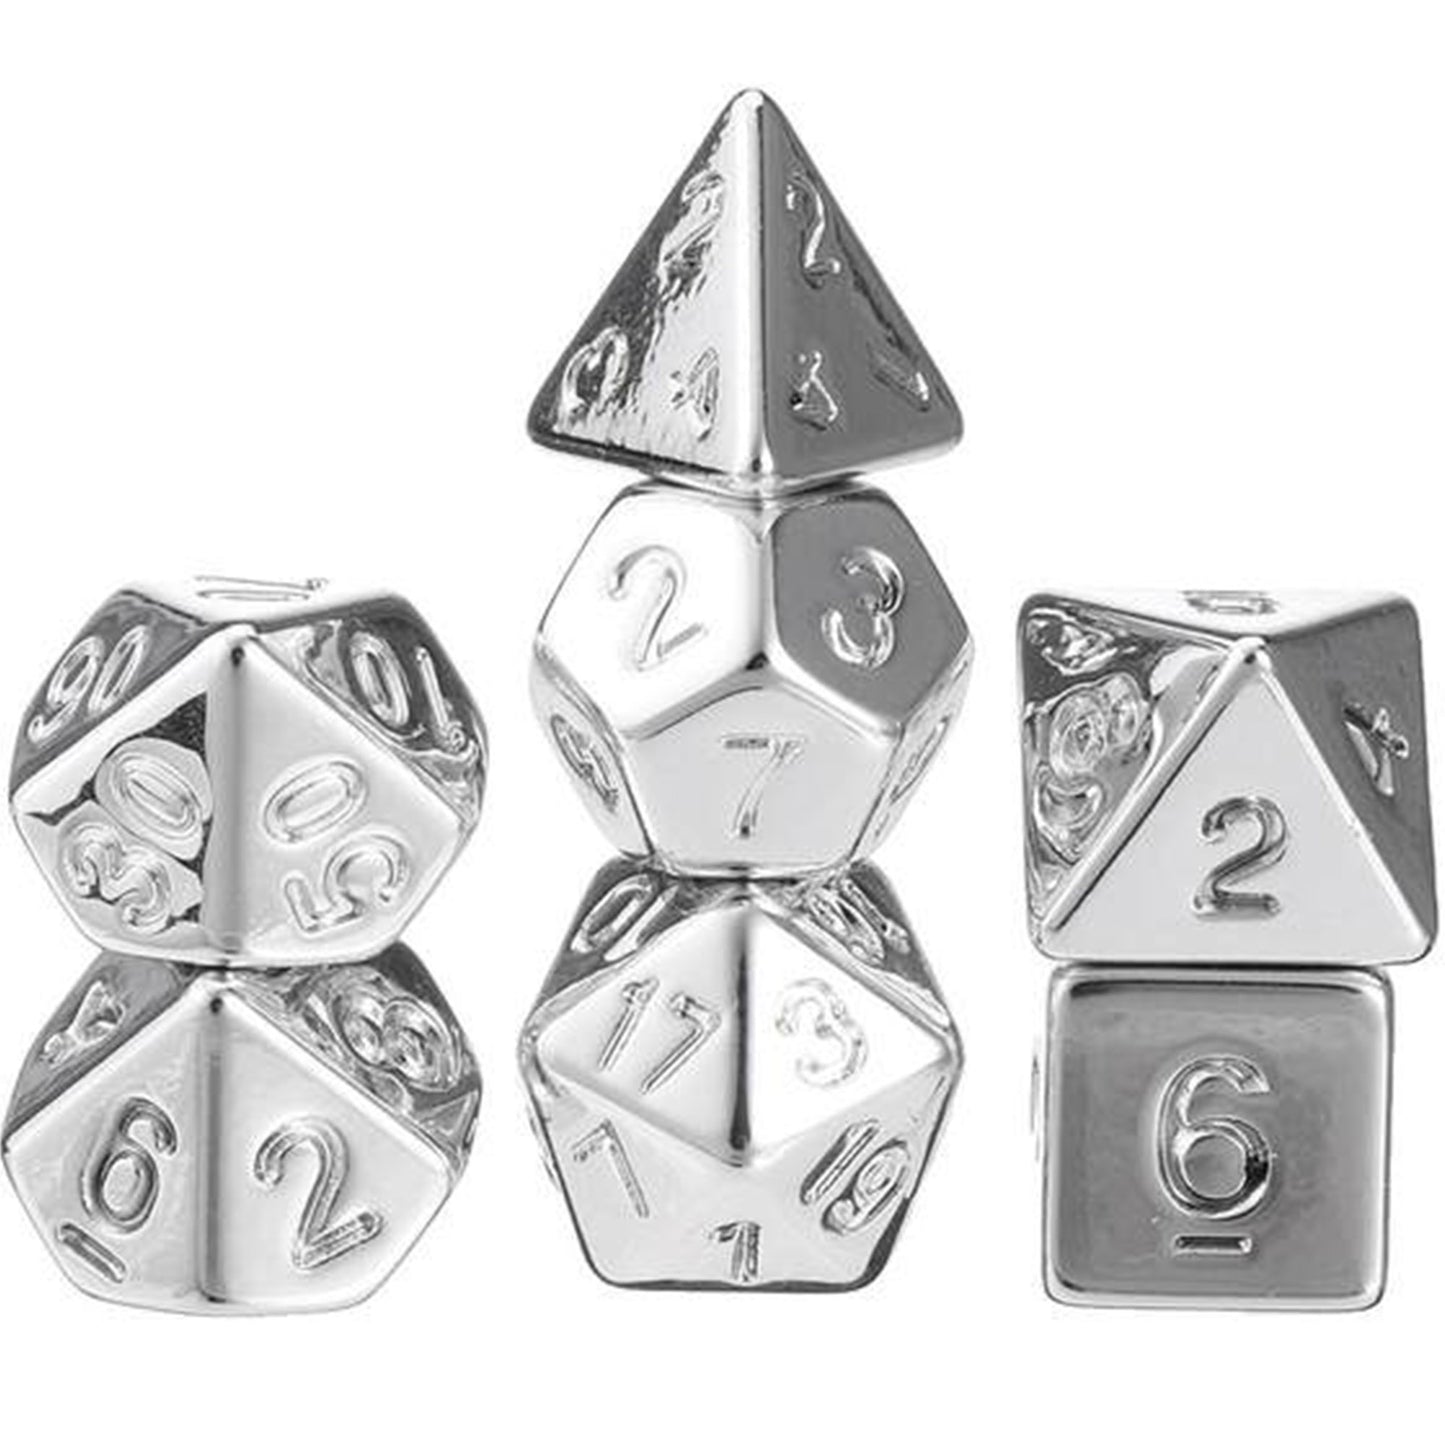 Silver electroplated polyhedral dice set | Happy Piranha